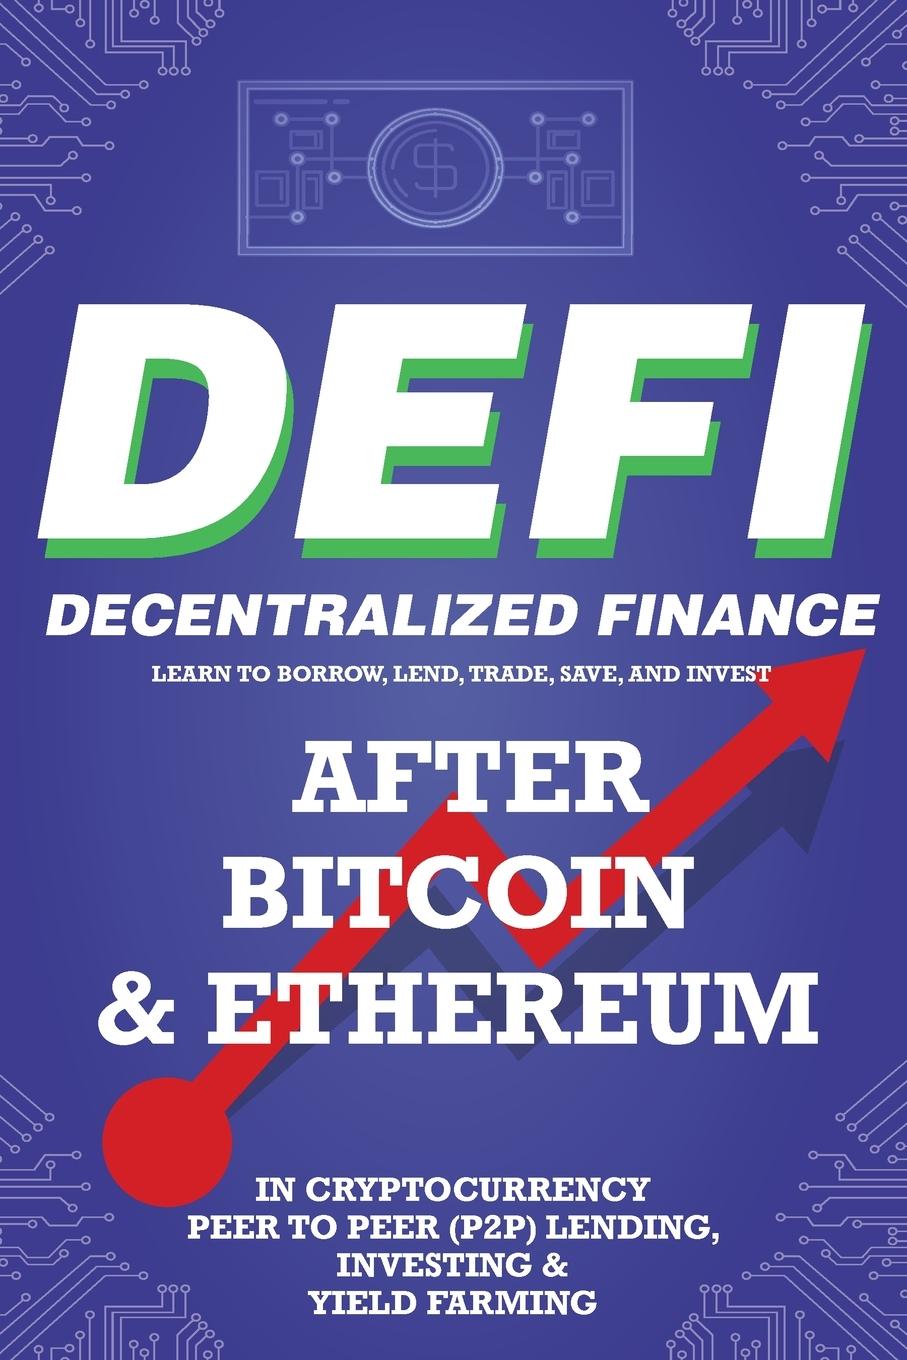 Book Decentralized Finance (DeFi) Learn to Borrow, Lend, Trade, Save, and Invest after Bitcoin & Ethereum in Cryptocurrency Peer to Peer (P2P) Lending, Inv 